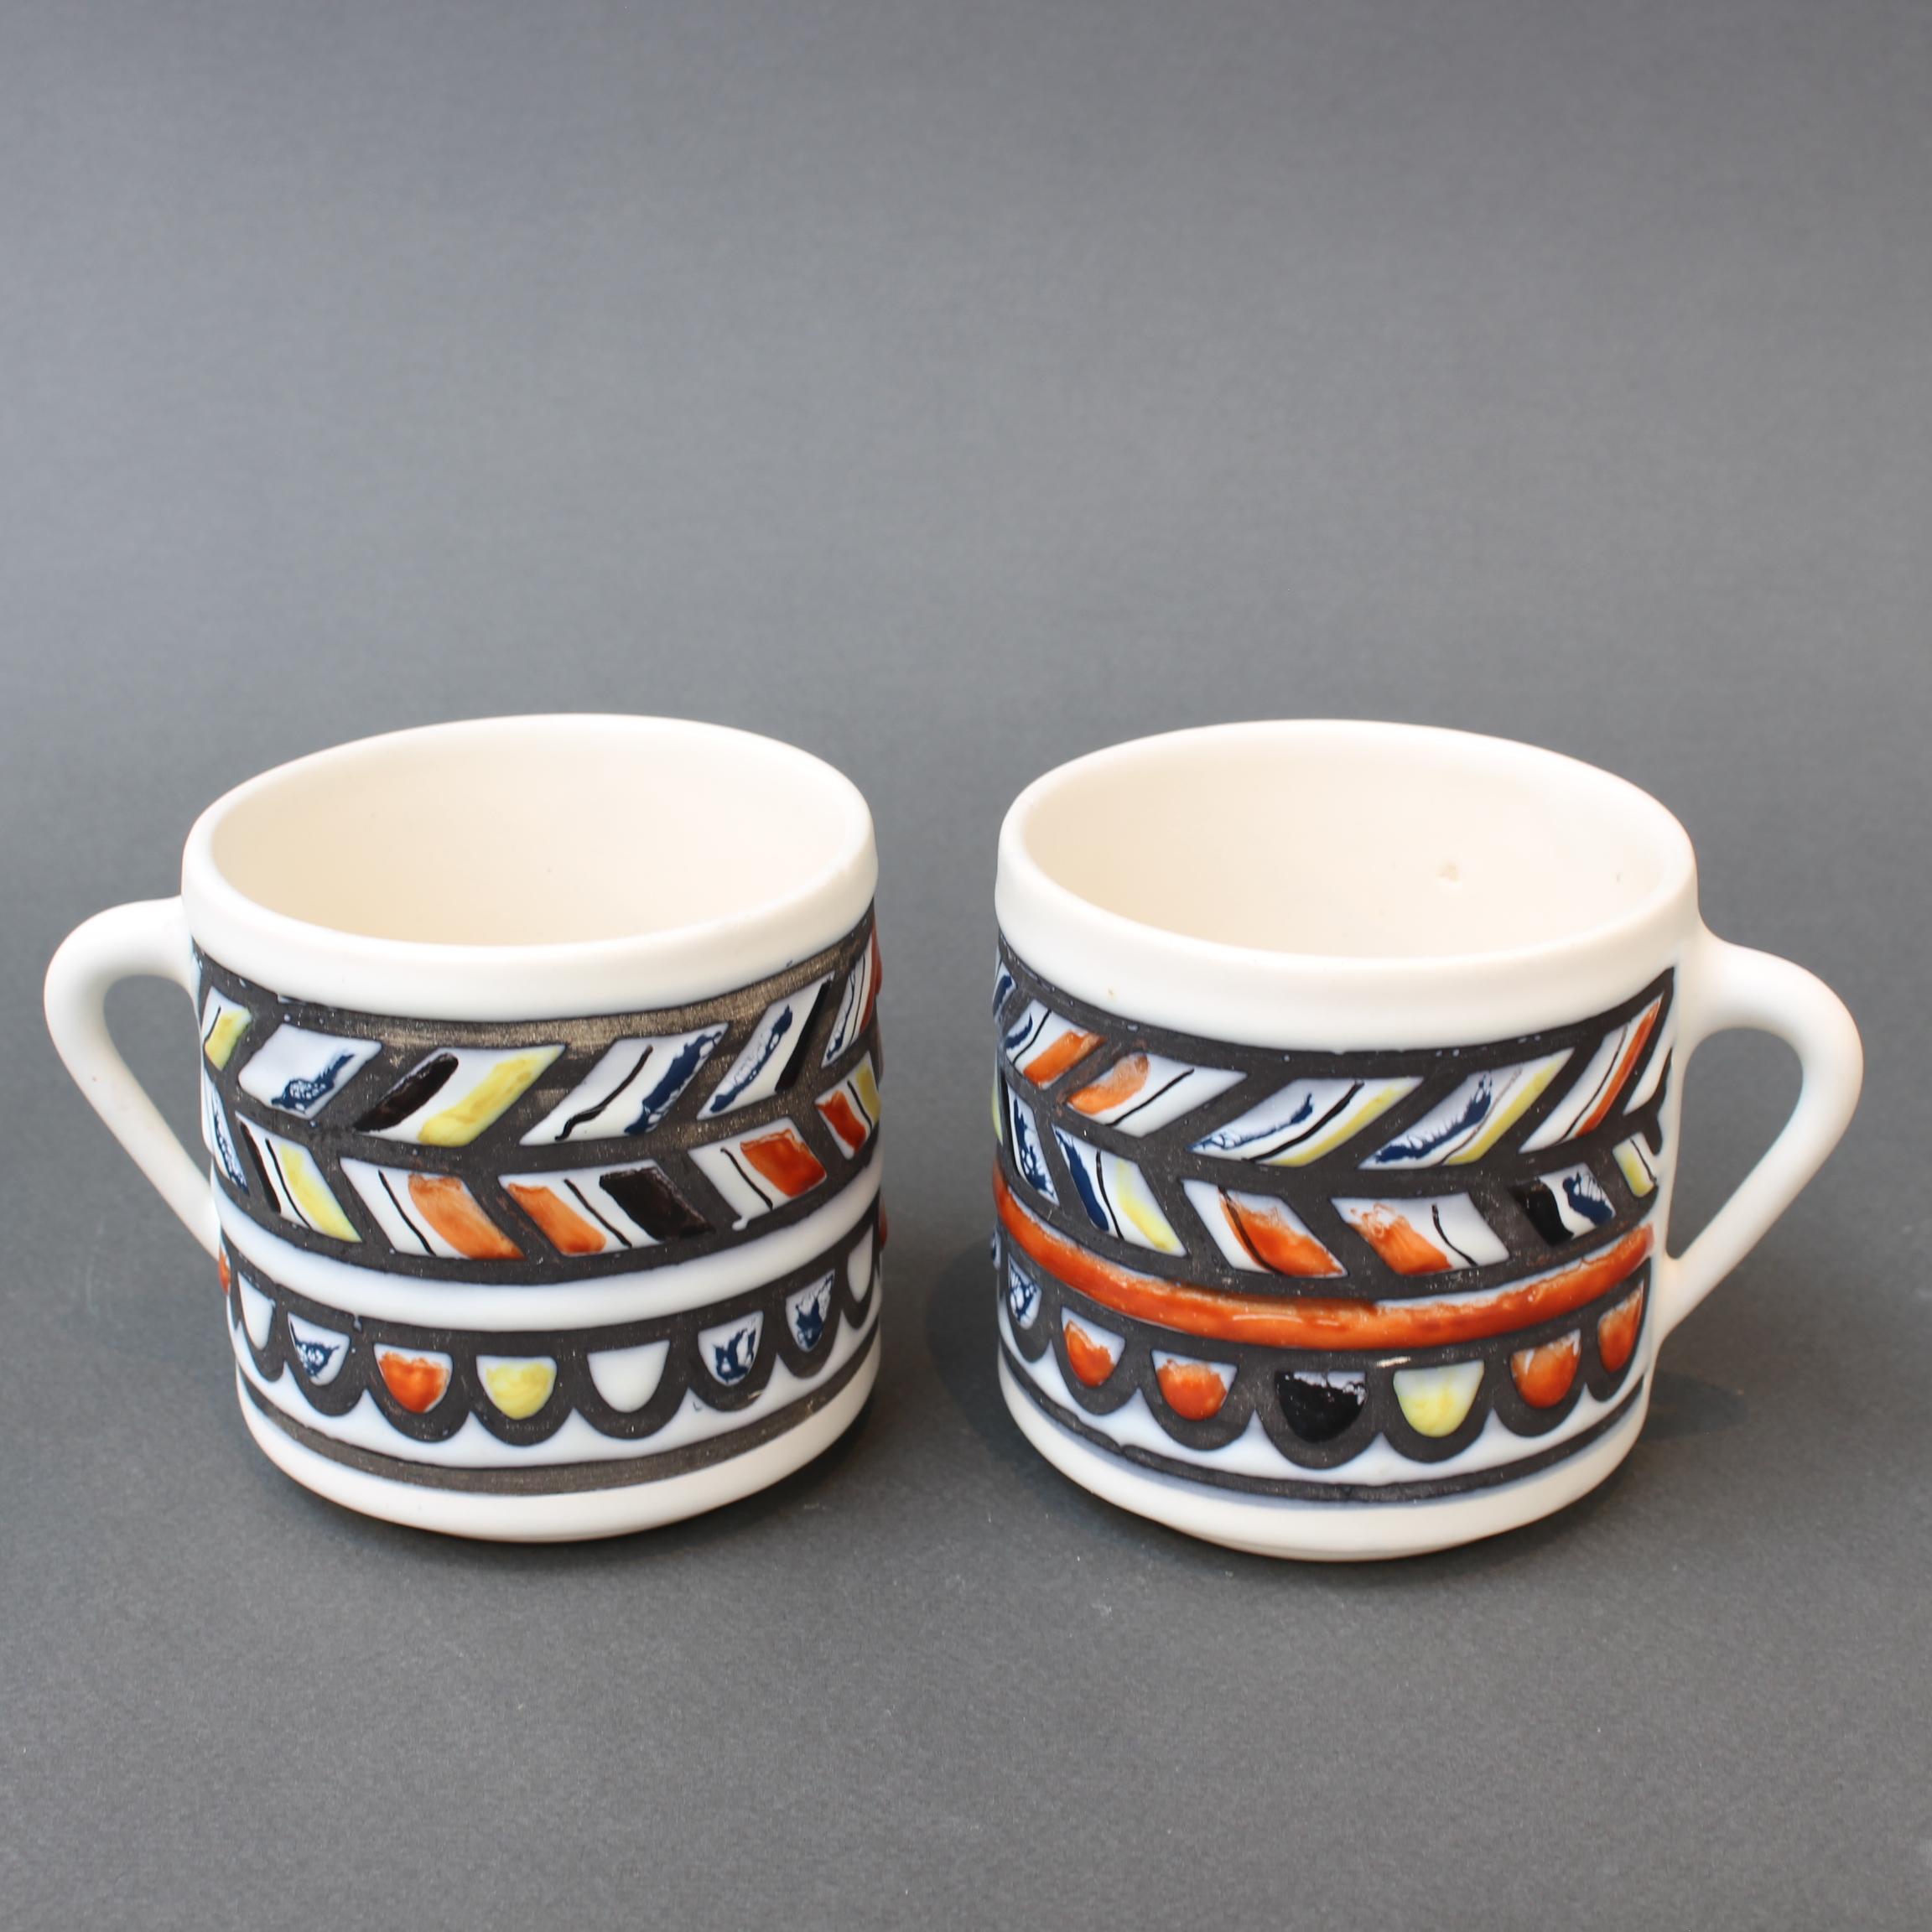 Vintage French Ceramic Set of Vessels by Roger Capron (circa 1960s) For Sale 2